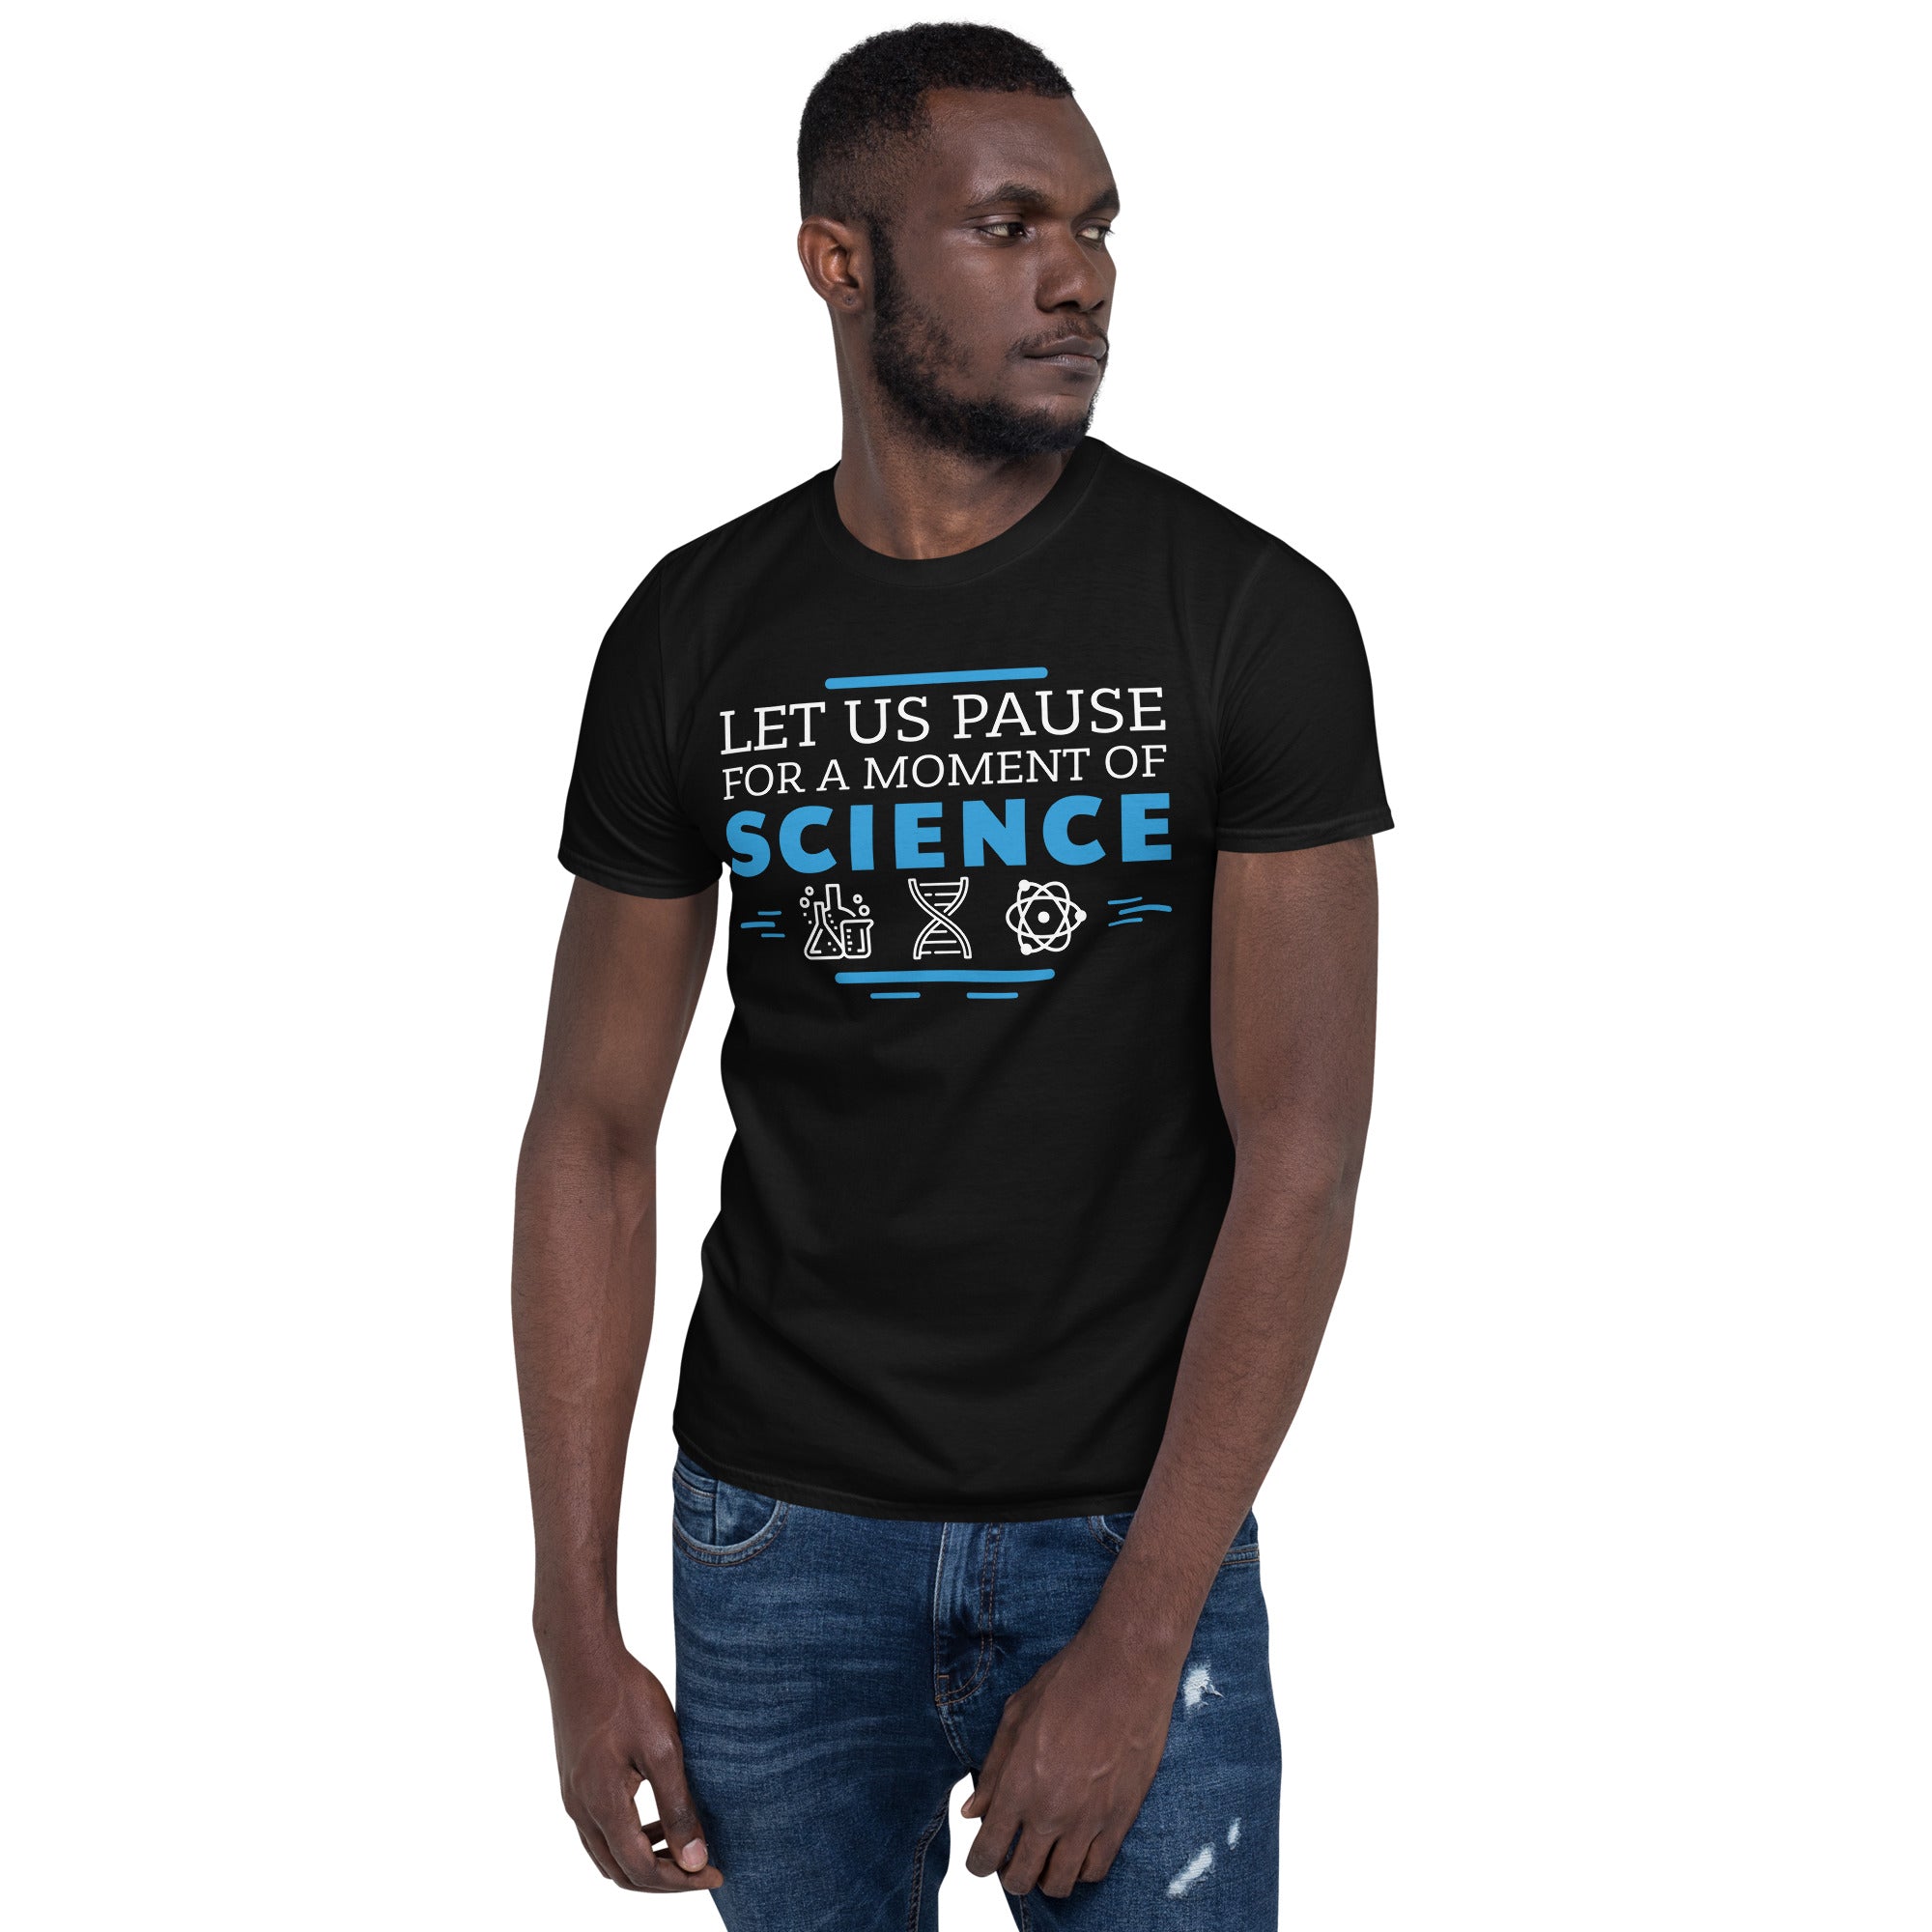 Moment of Science - Short-Sleeve Unisex T-Shirt